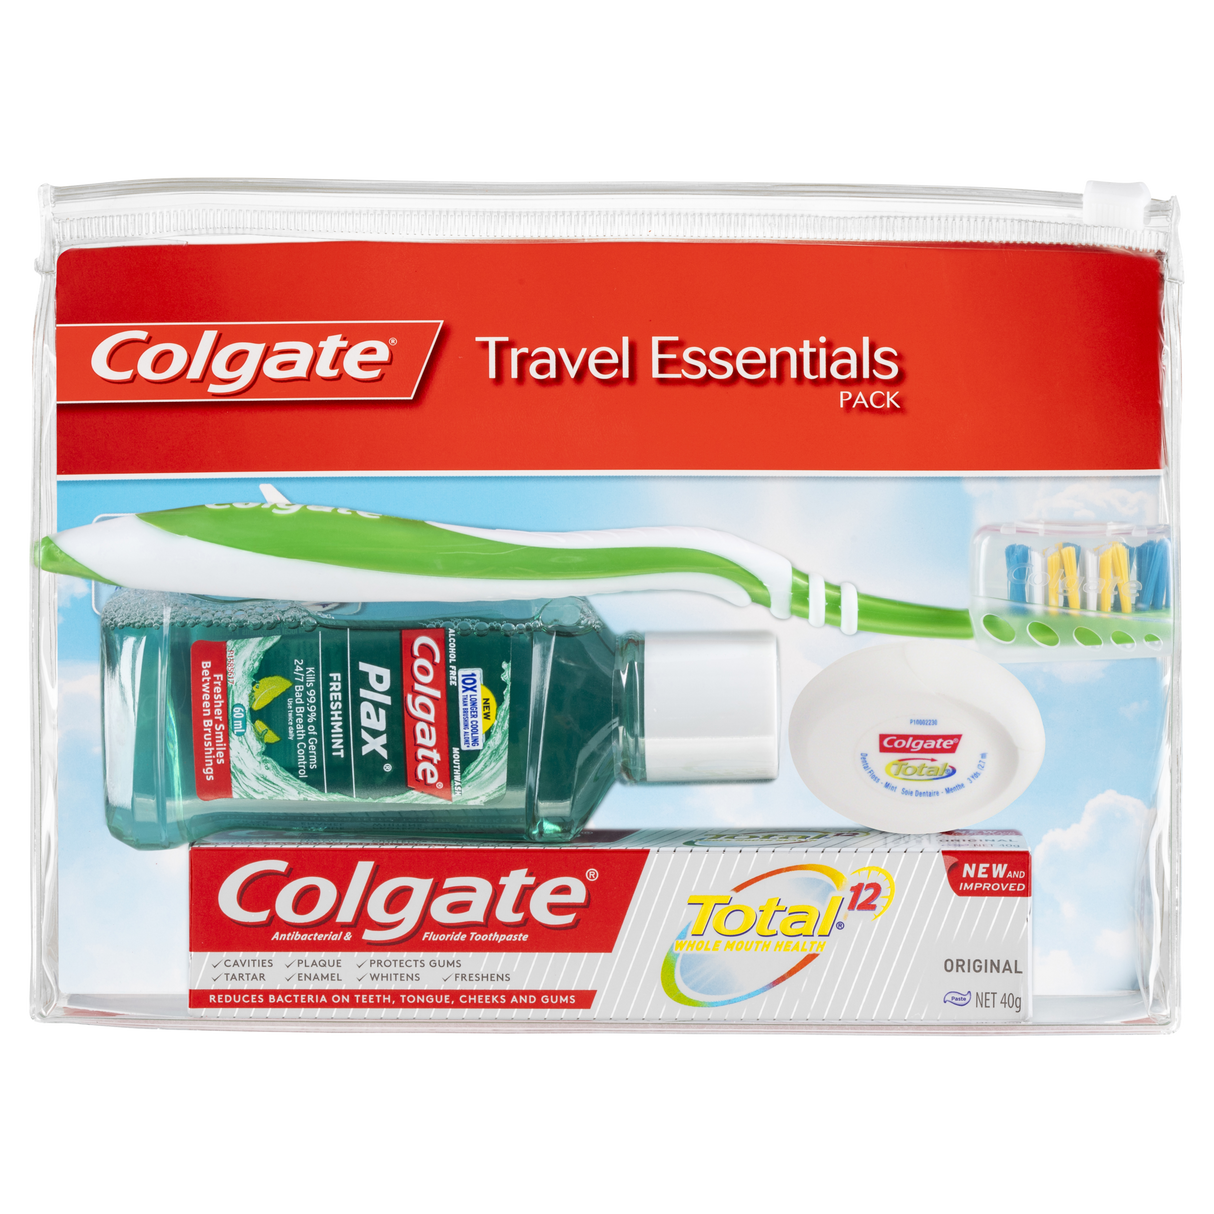 Colgate Travel Essentials Kit Toothbrush Toothpaste Mouthwash and Dental Floss 1 Pack